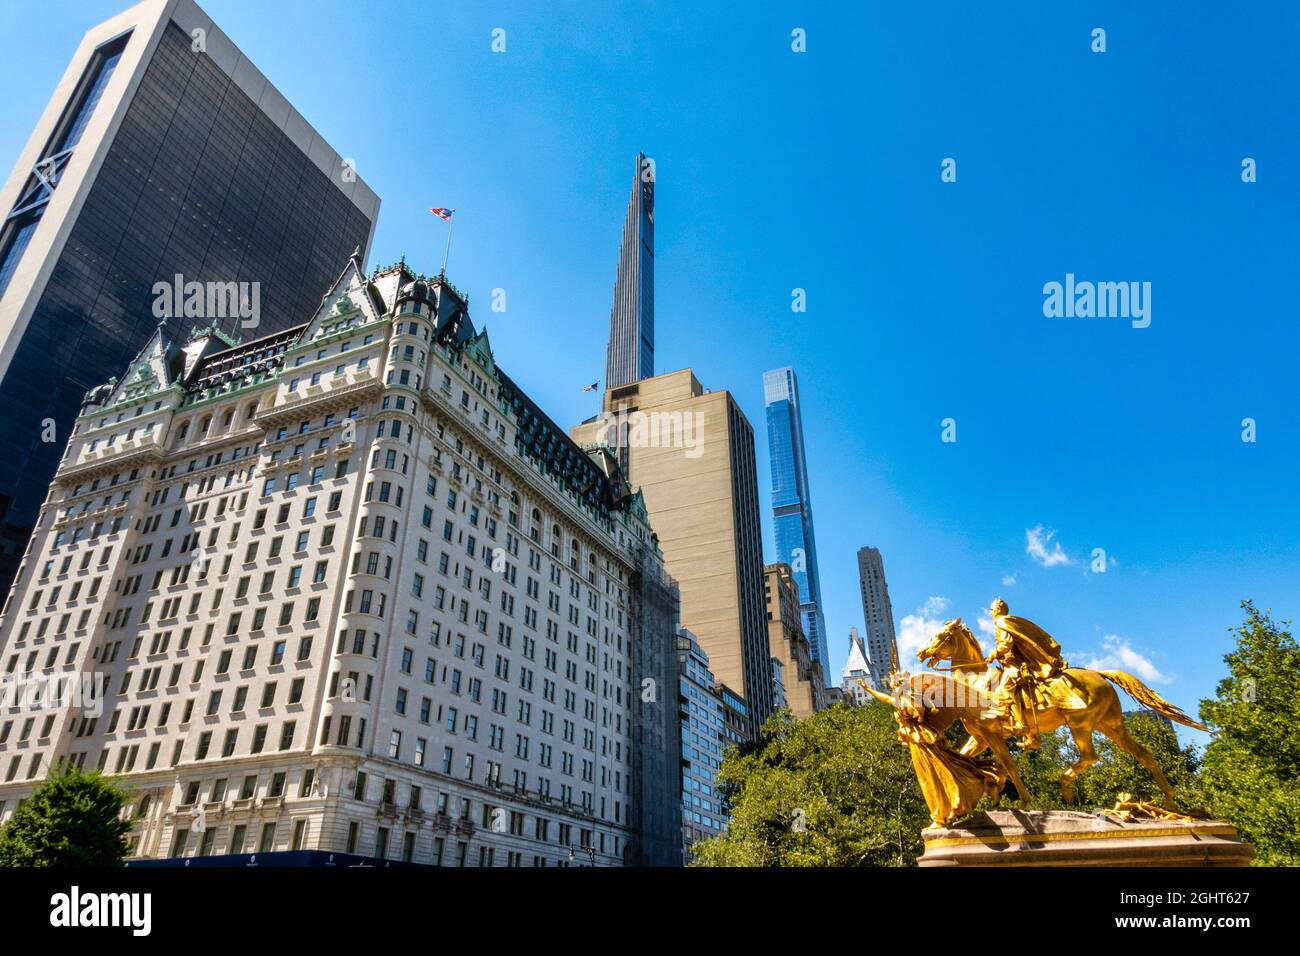 The Statue of General Sherman in Grand Army Plaza is dwarfed by the Super Tall buildings south of Central Park, New York City, USA Stock Photo